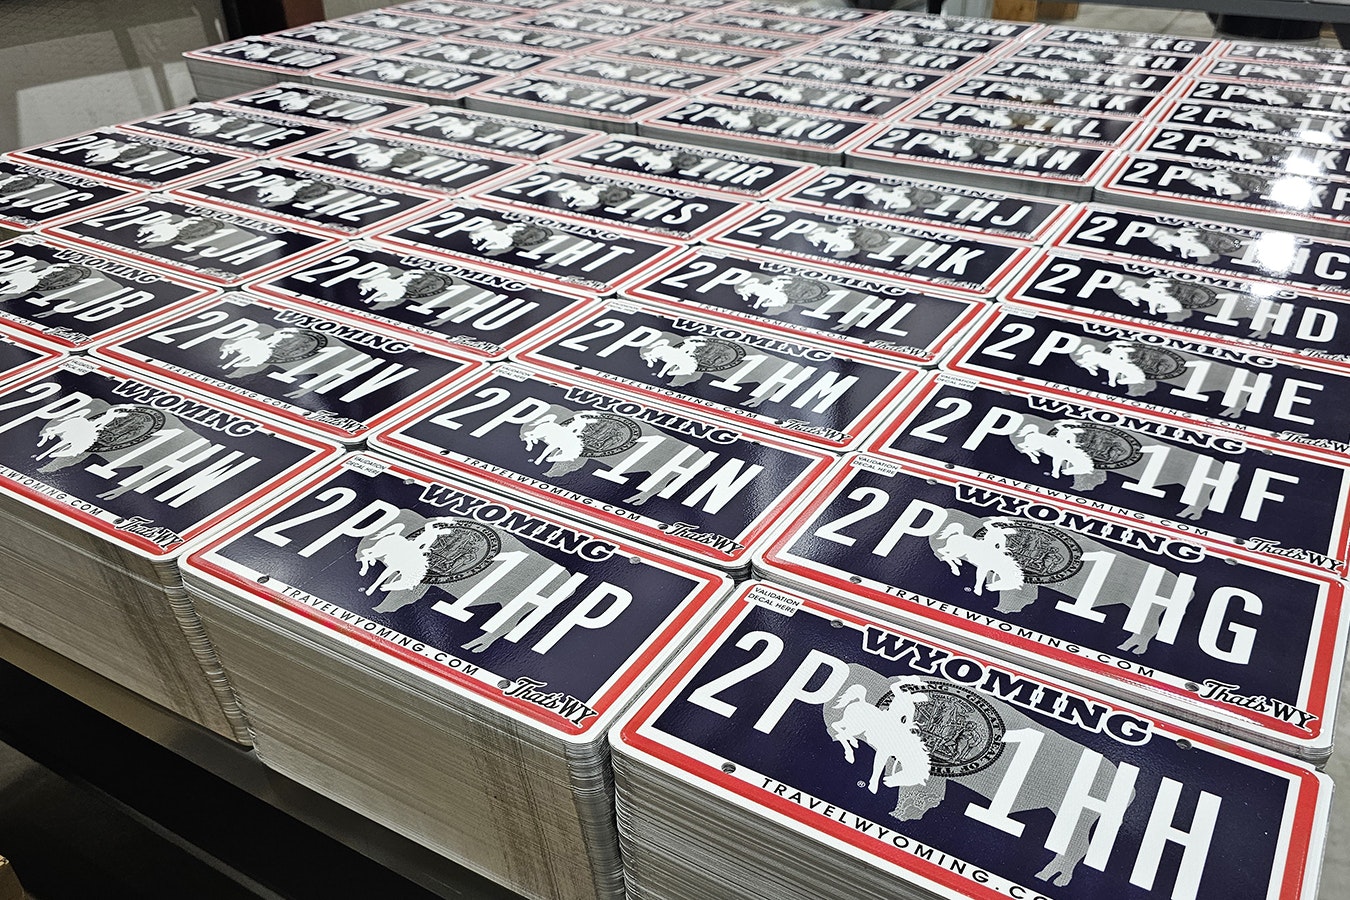 In a secret Cheyenne warehouse dubbed "Area 51," thousands of Wyoming's new license plates are being made.